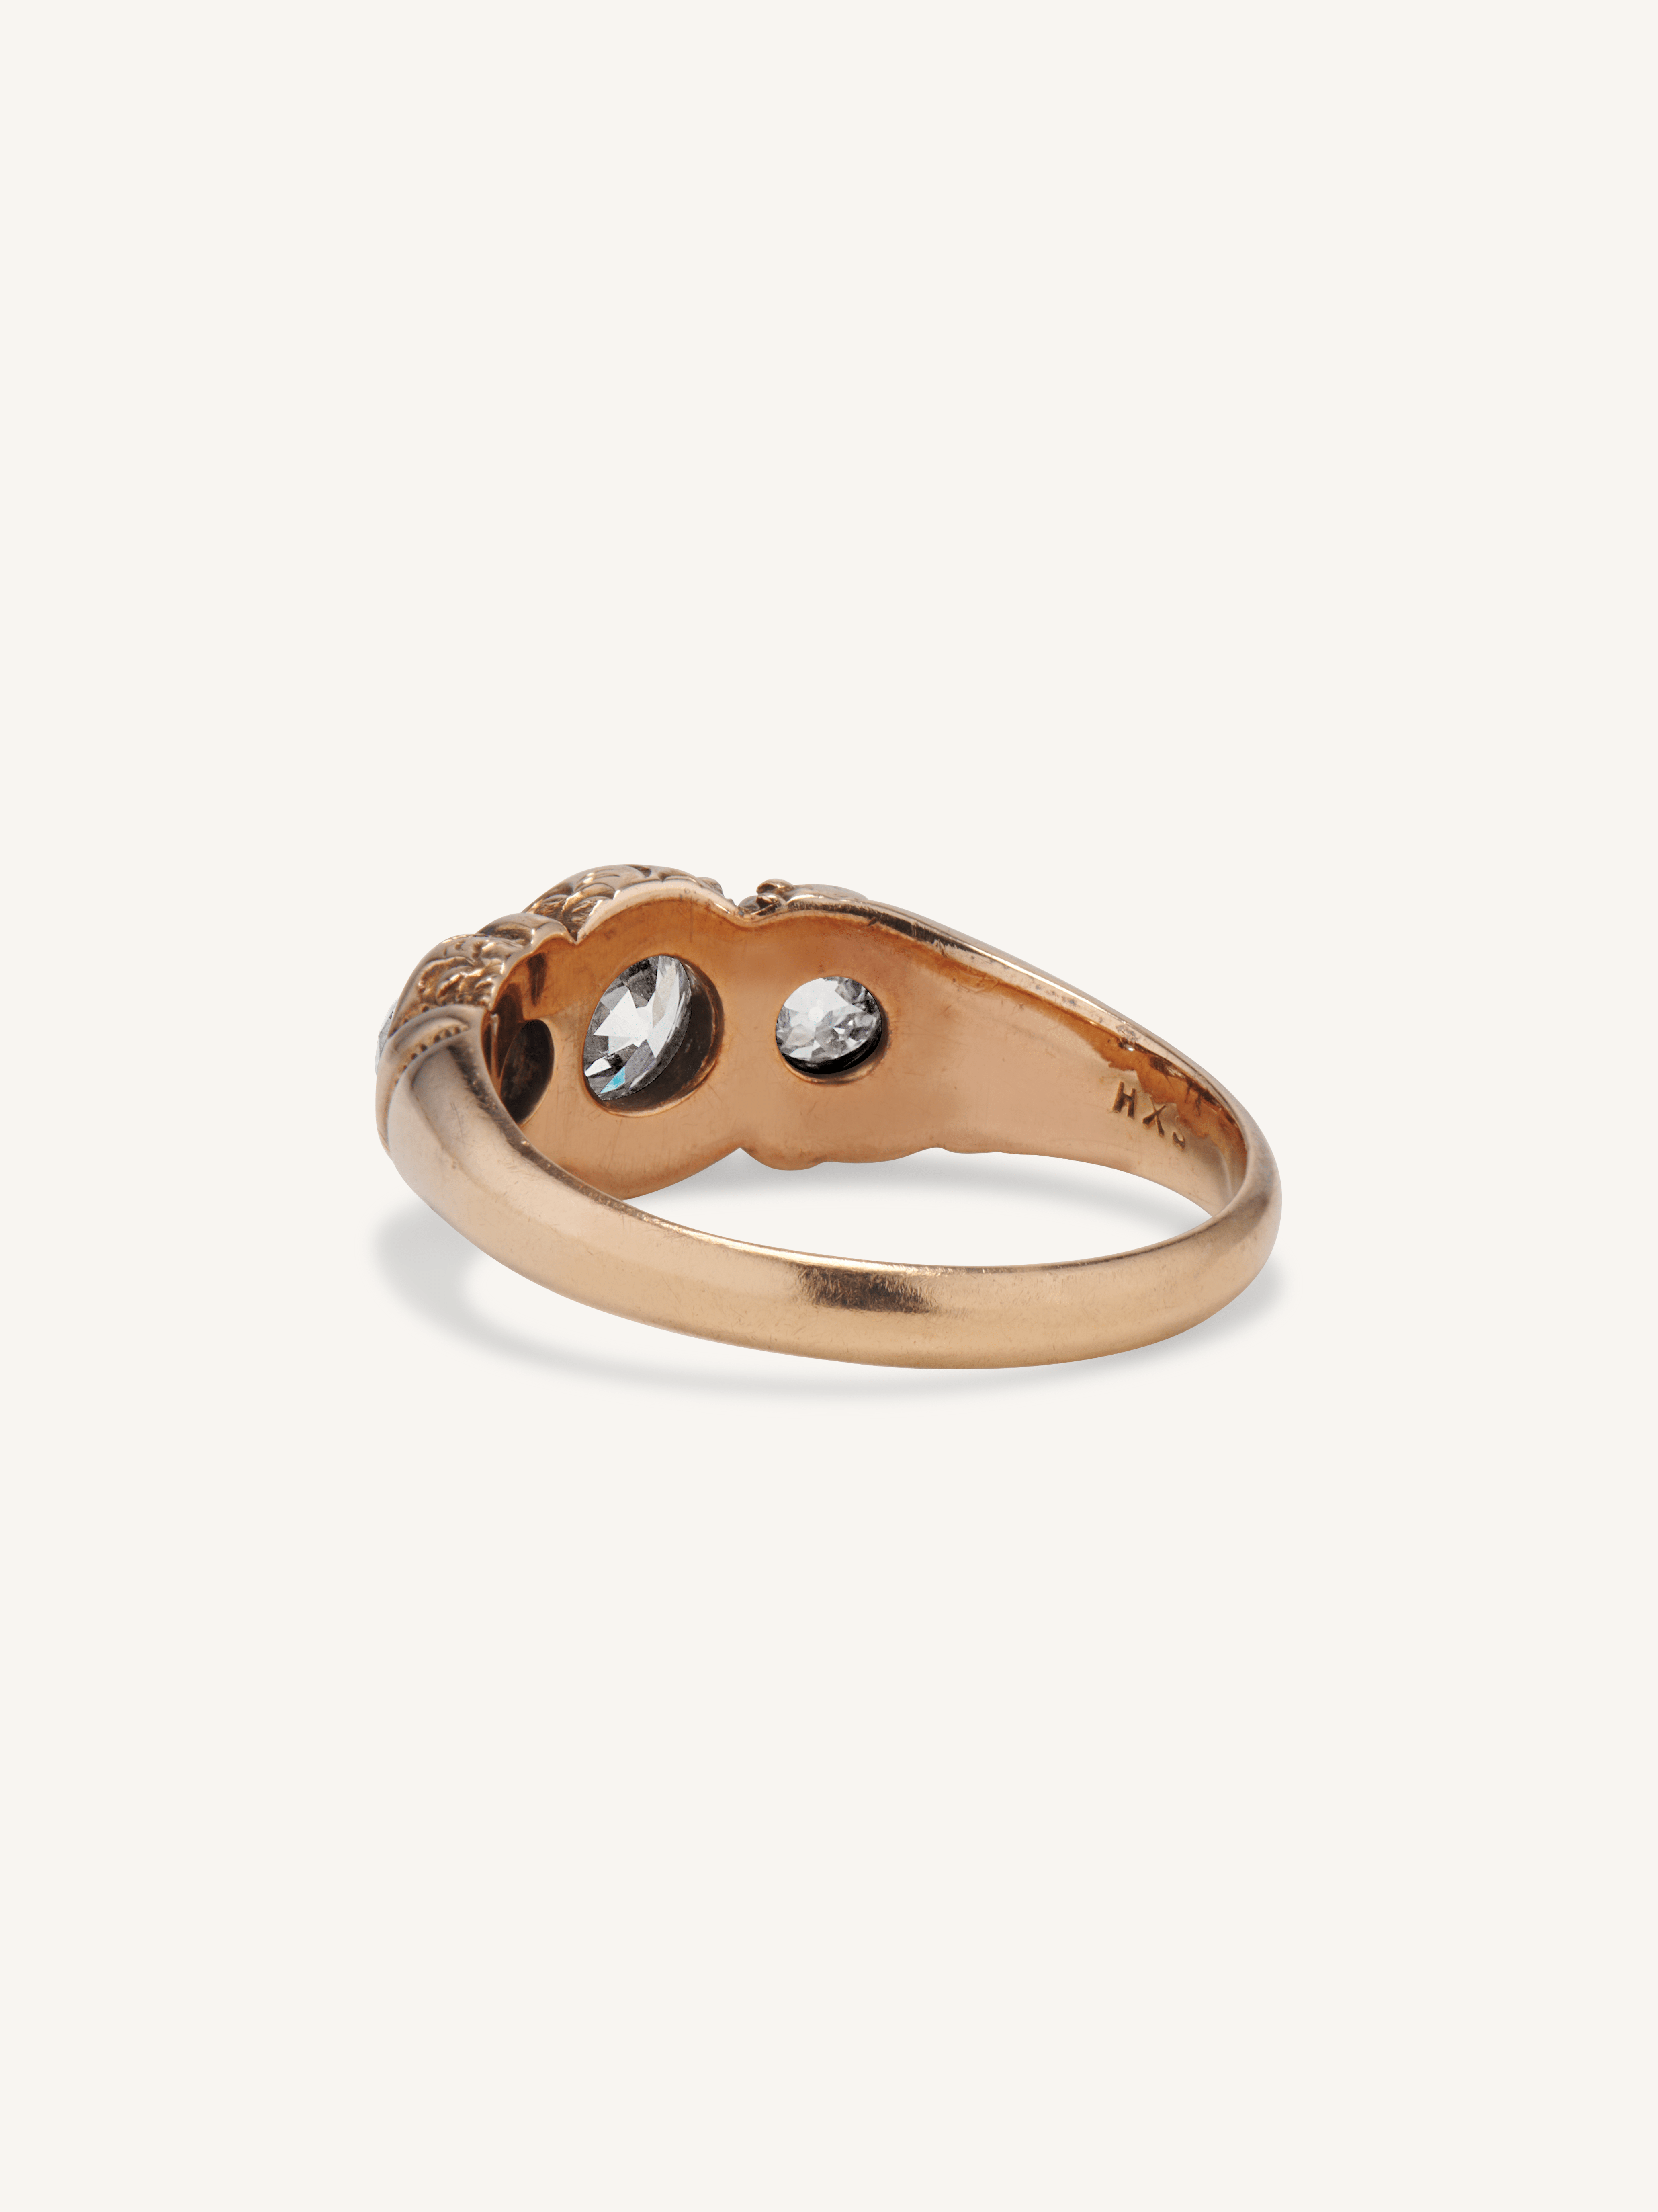 Buy Shaya by CaratLane The Precious One 7 Stone Ring in Gold Plated 925  Silver Online